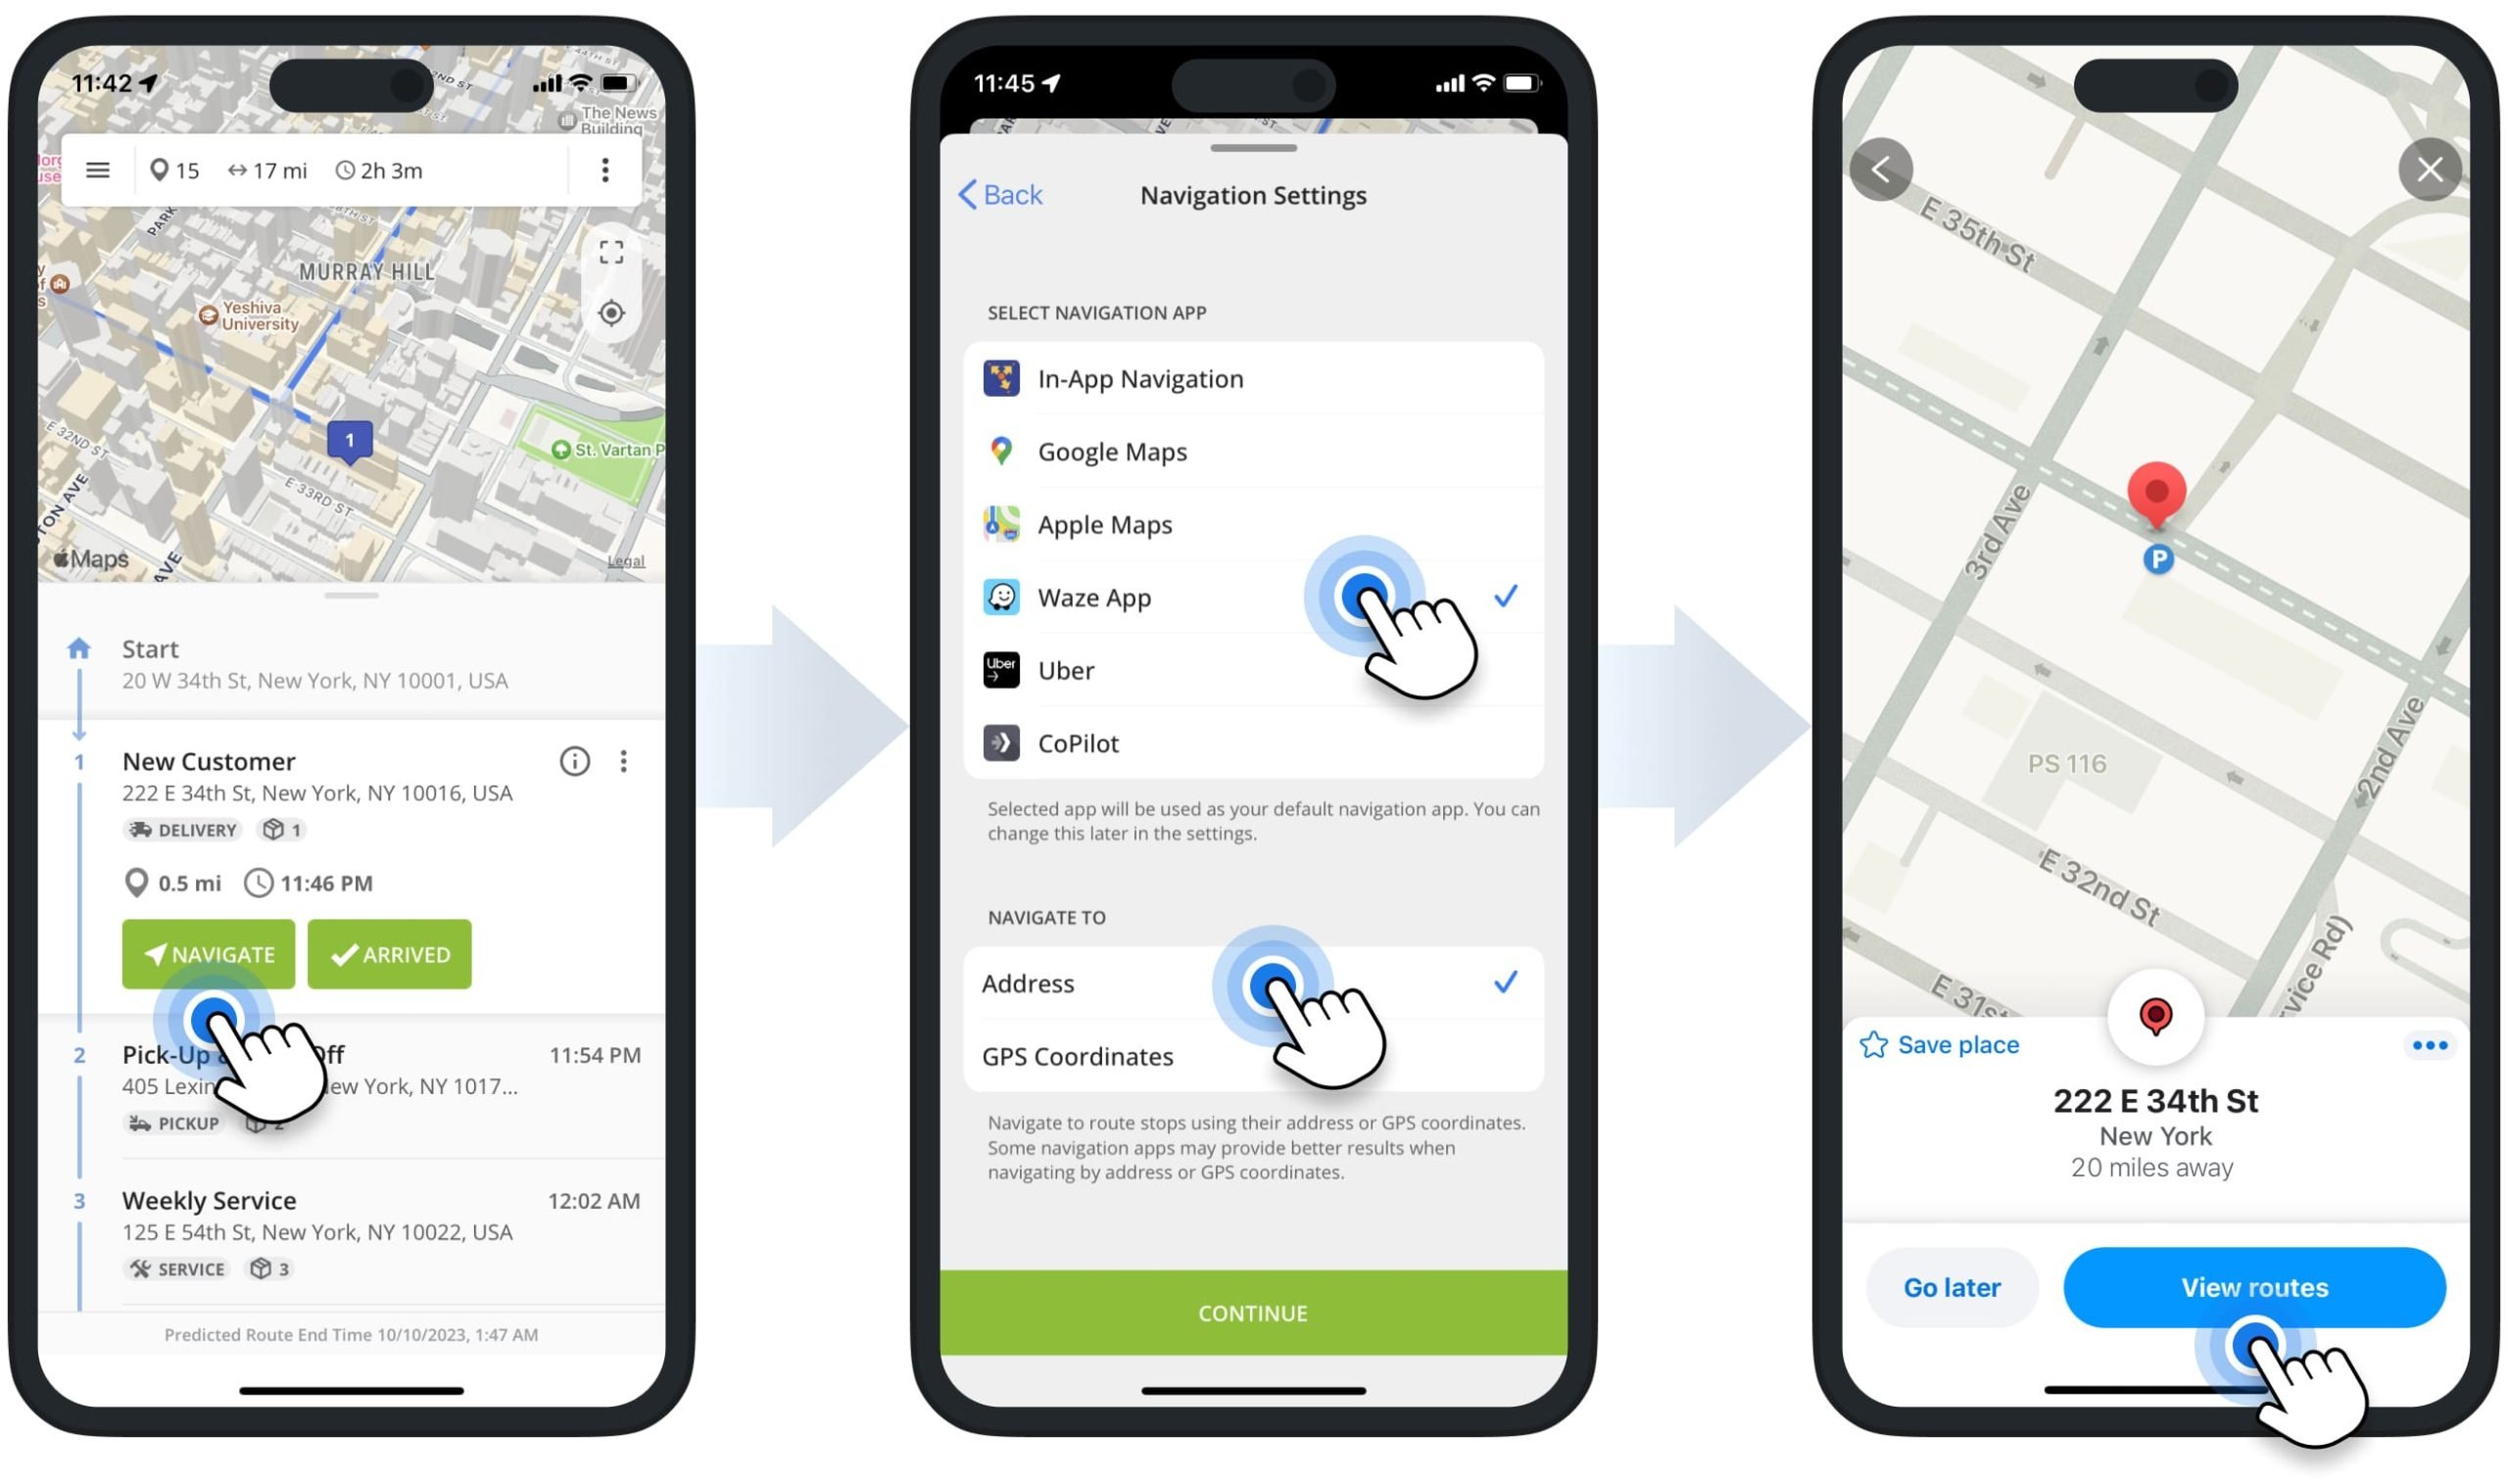 Apple Maps route planner GPS navigation for navigating Route4Me iOS Route Optimization app sequenced multi-stop routes.